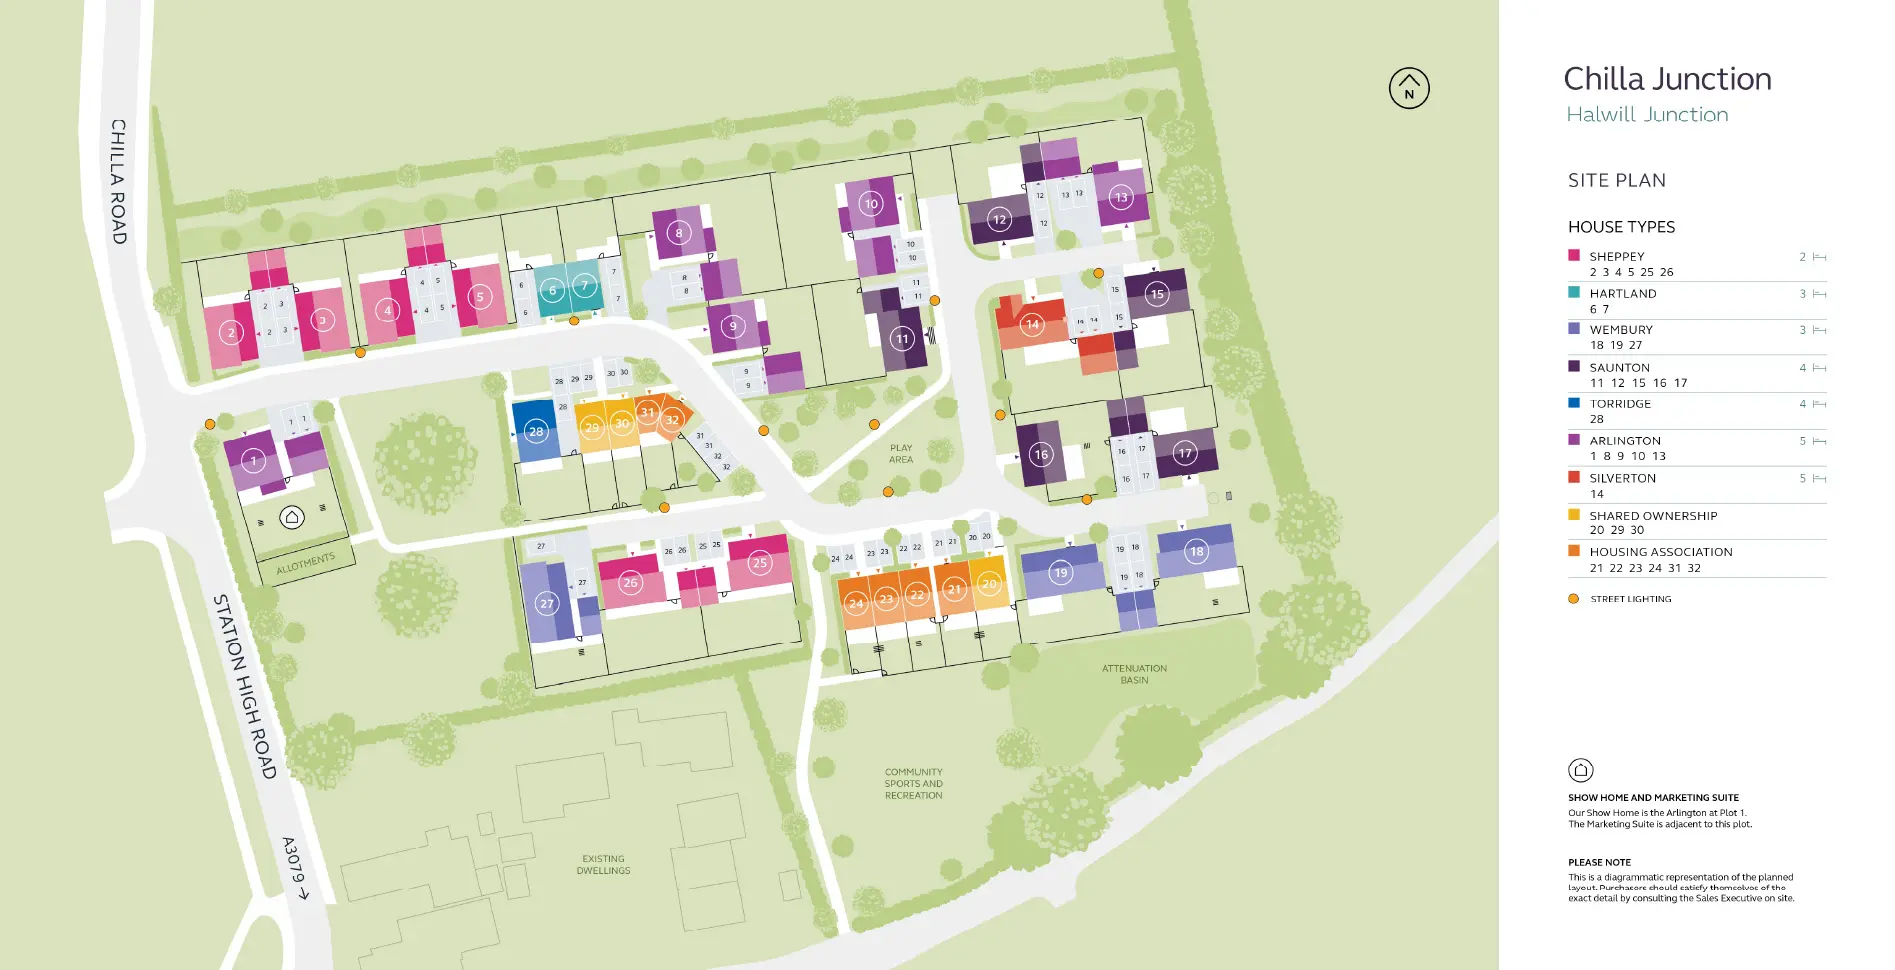 Chilla Junction New Homes Development - Site Layout